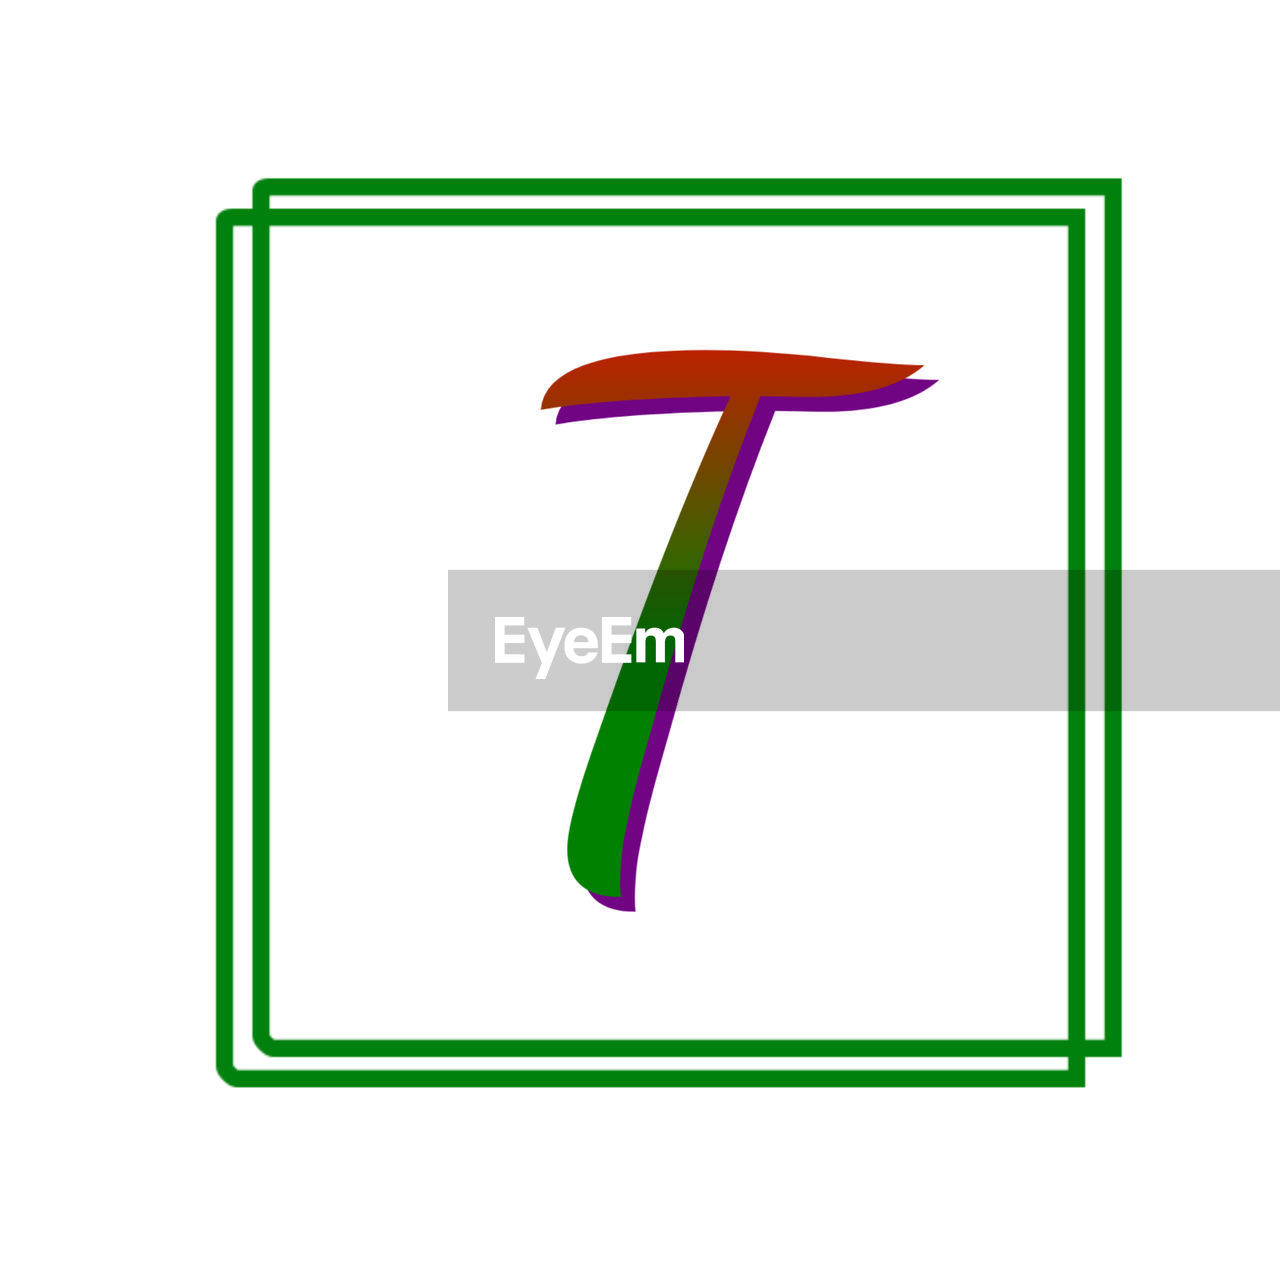 font, white background, line, cut out, text, logo, green, communication, clip art, diagram, sign, no people, symbol